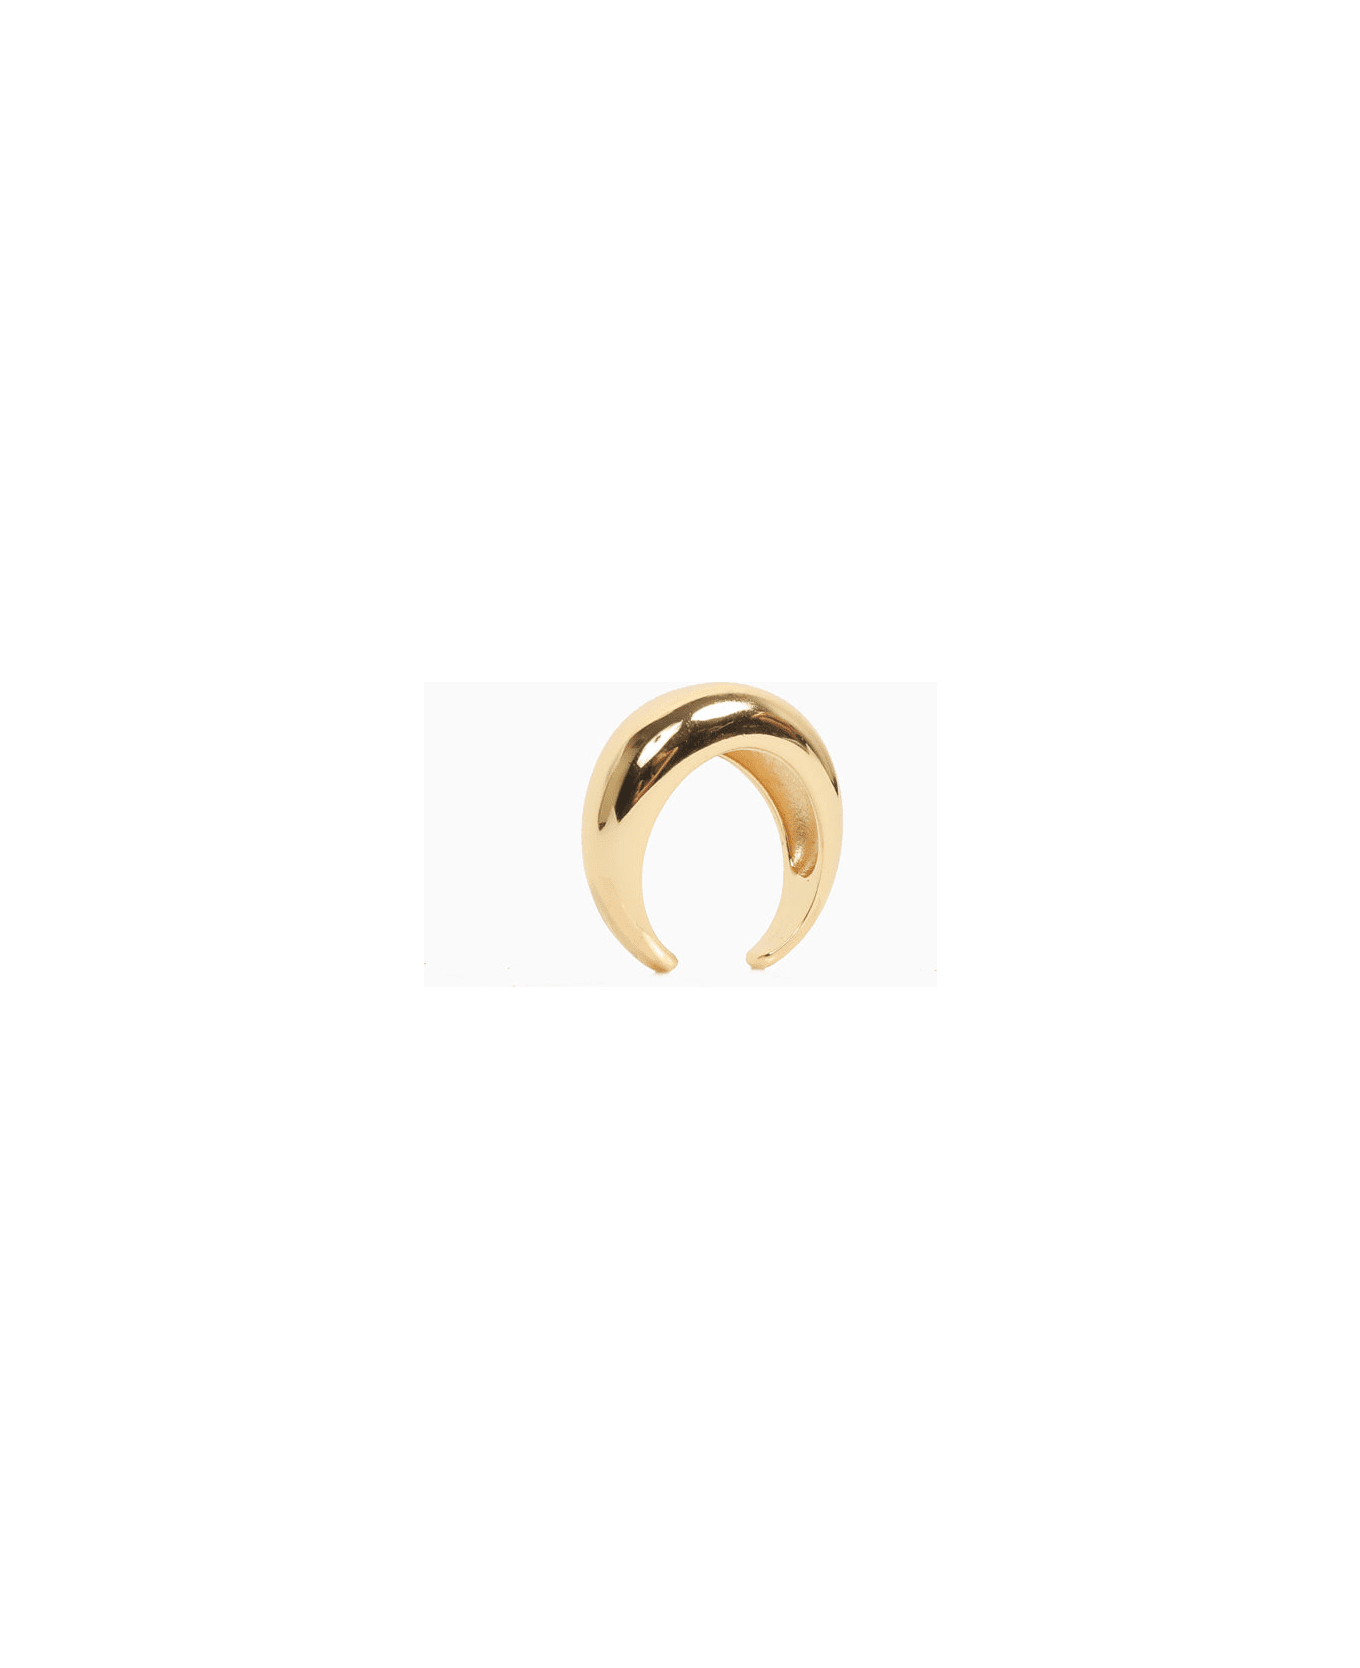 Federica Tosi Ring Stone Gold - GOLD